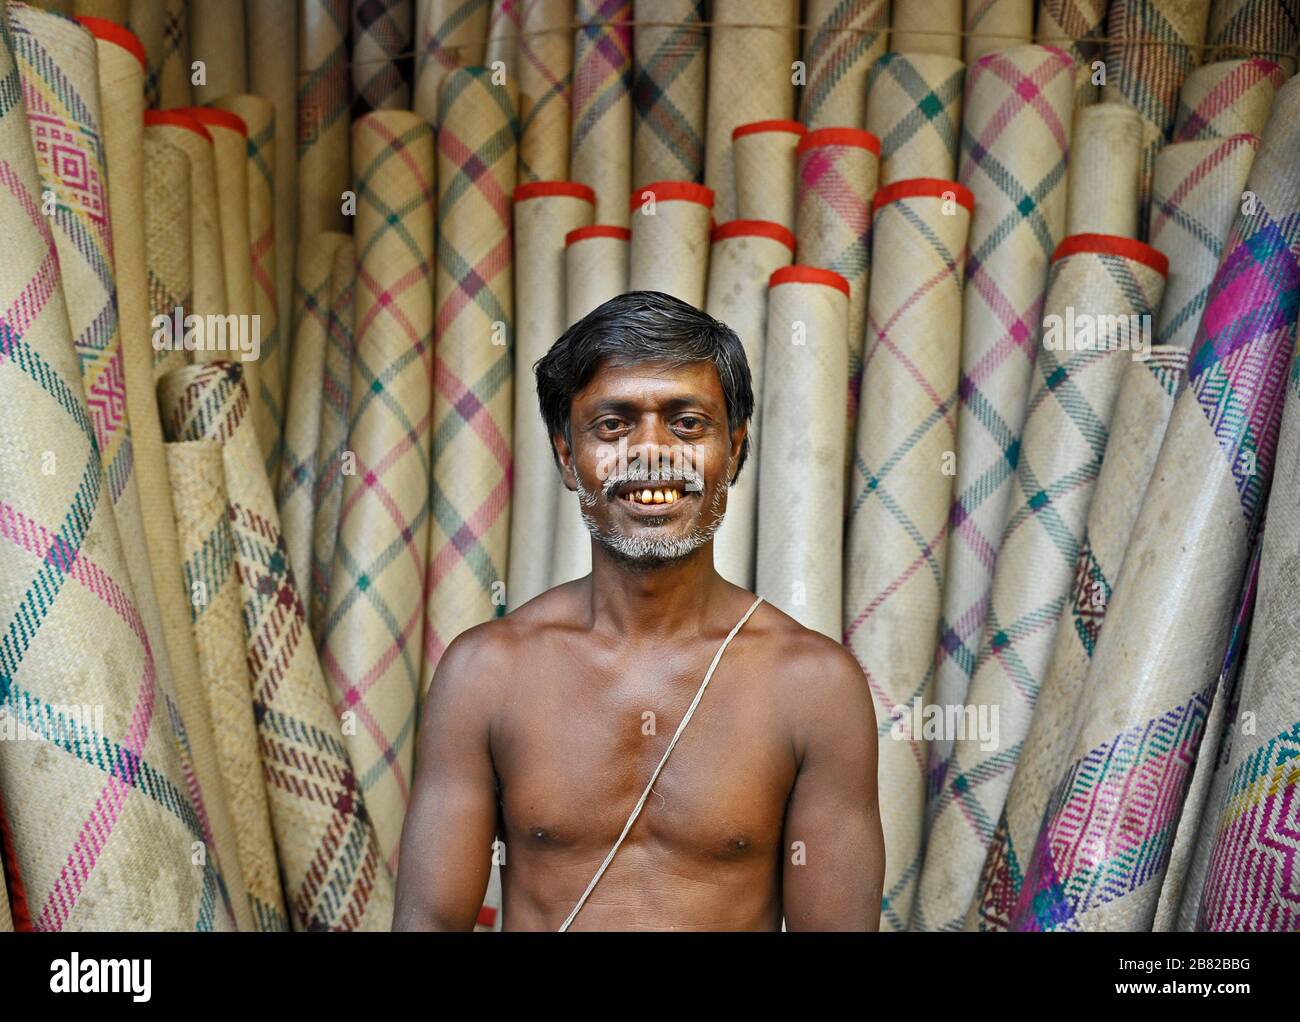 Handicraft shop on account of the 'Jabbar er Boli khela', a century old wrestling competition is one of the oldest traditions of the port city of Chit Stock Photo